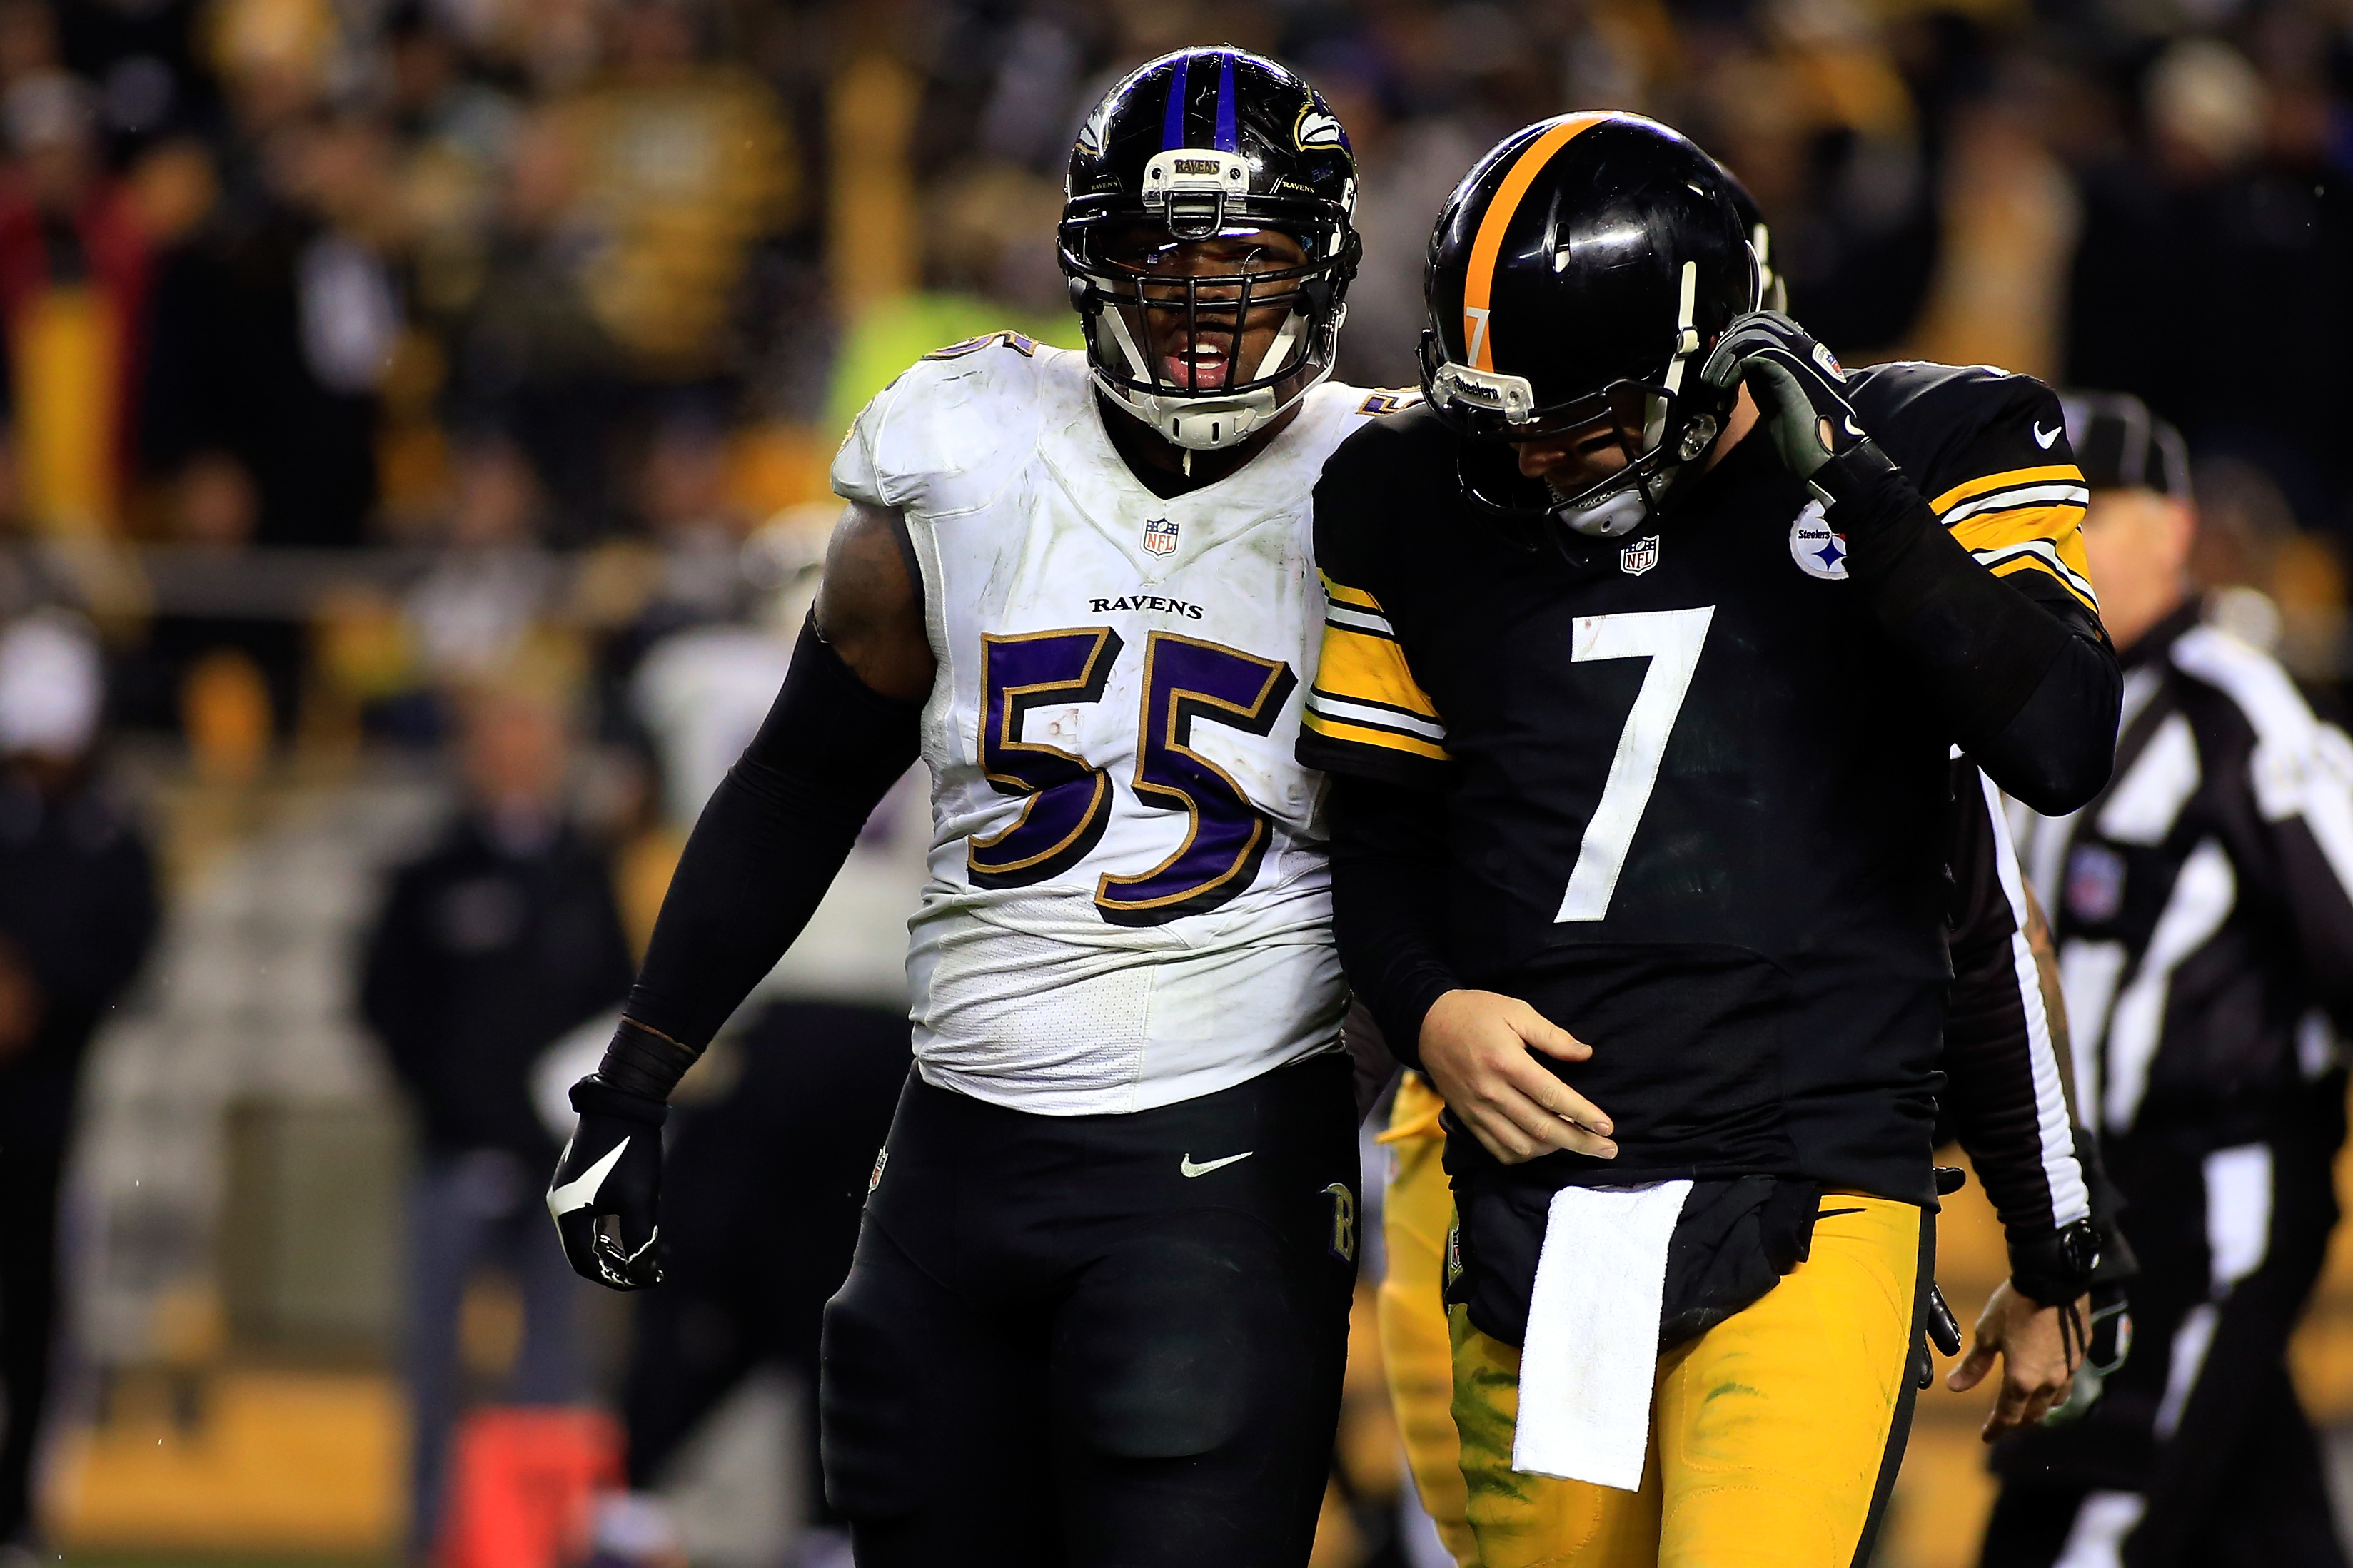 Ravens LB Terrell Suggs talks to Steelers QB Ben Roethlisberger during a game